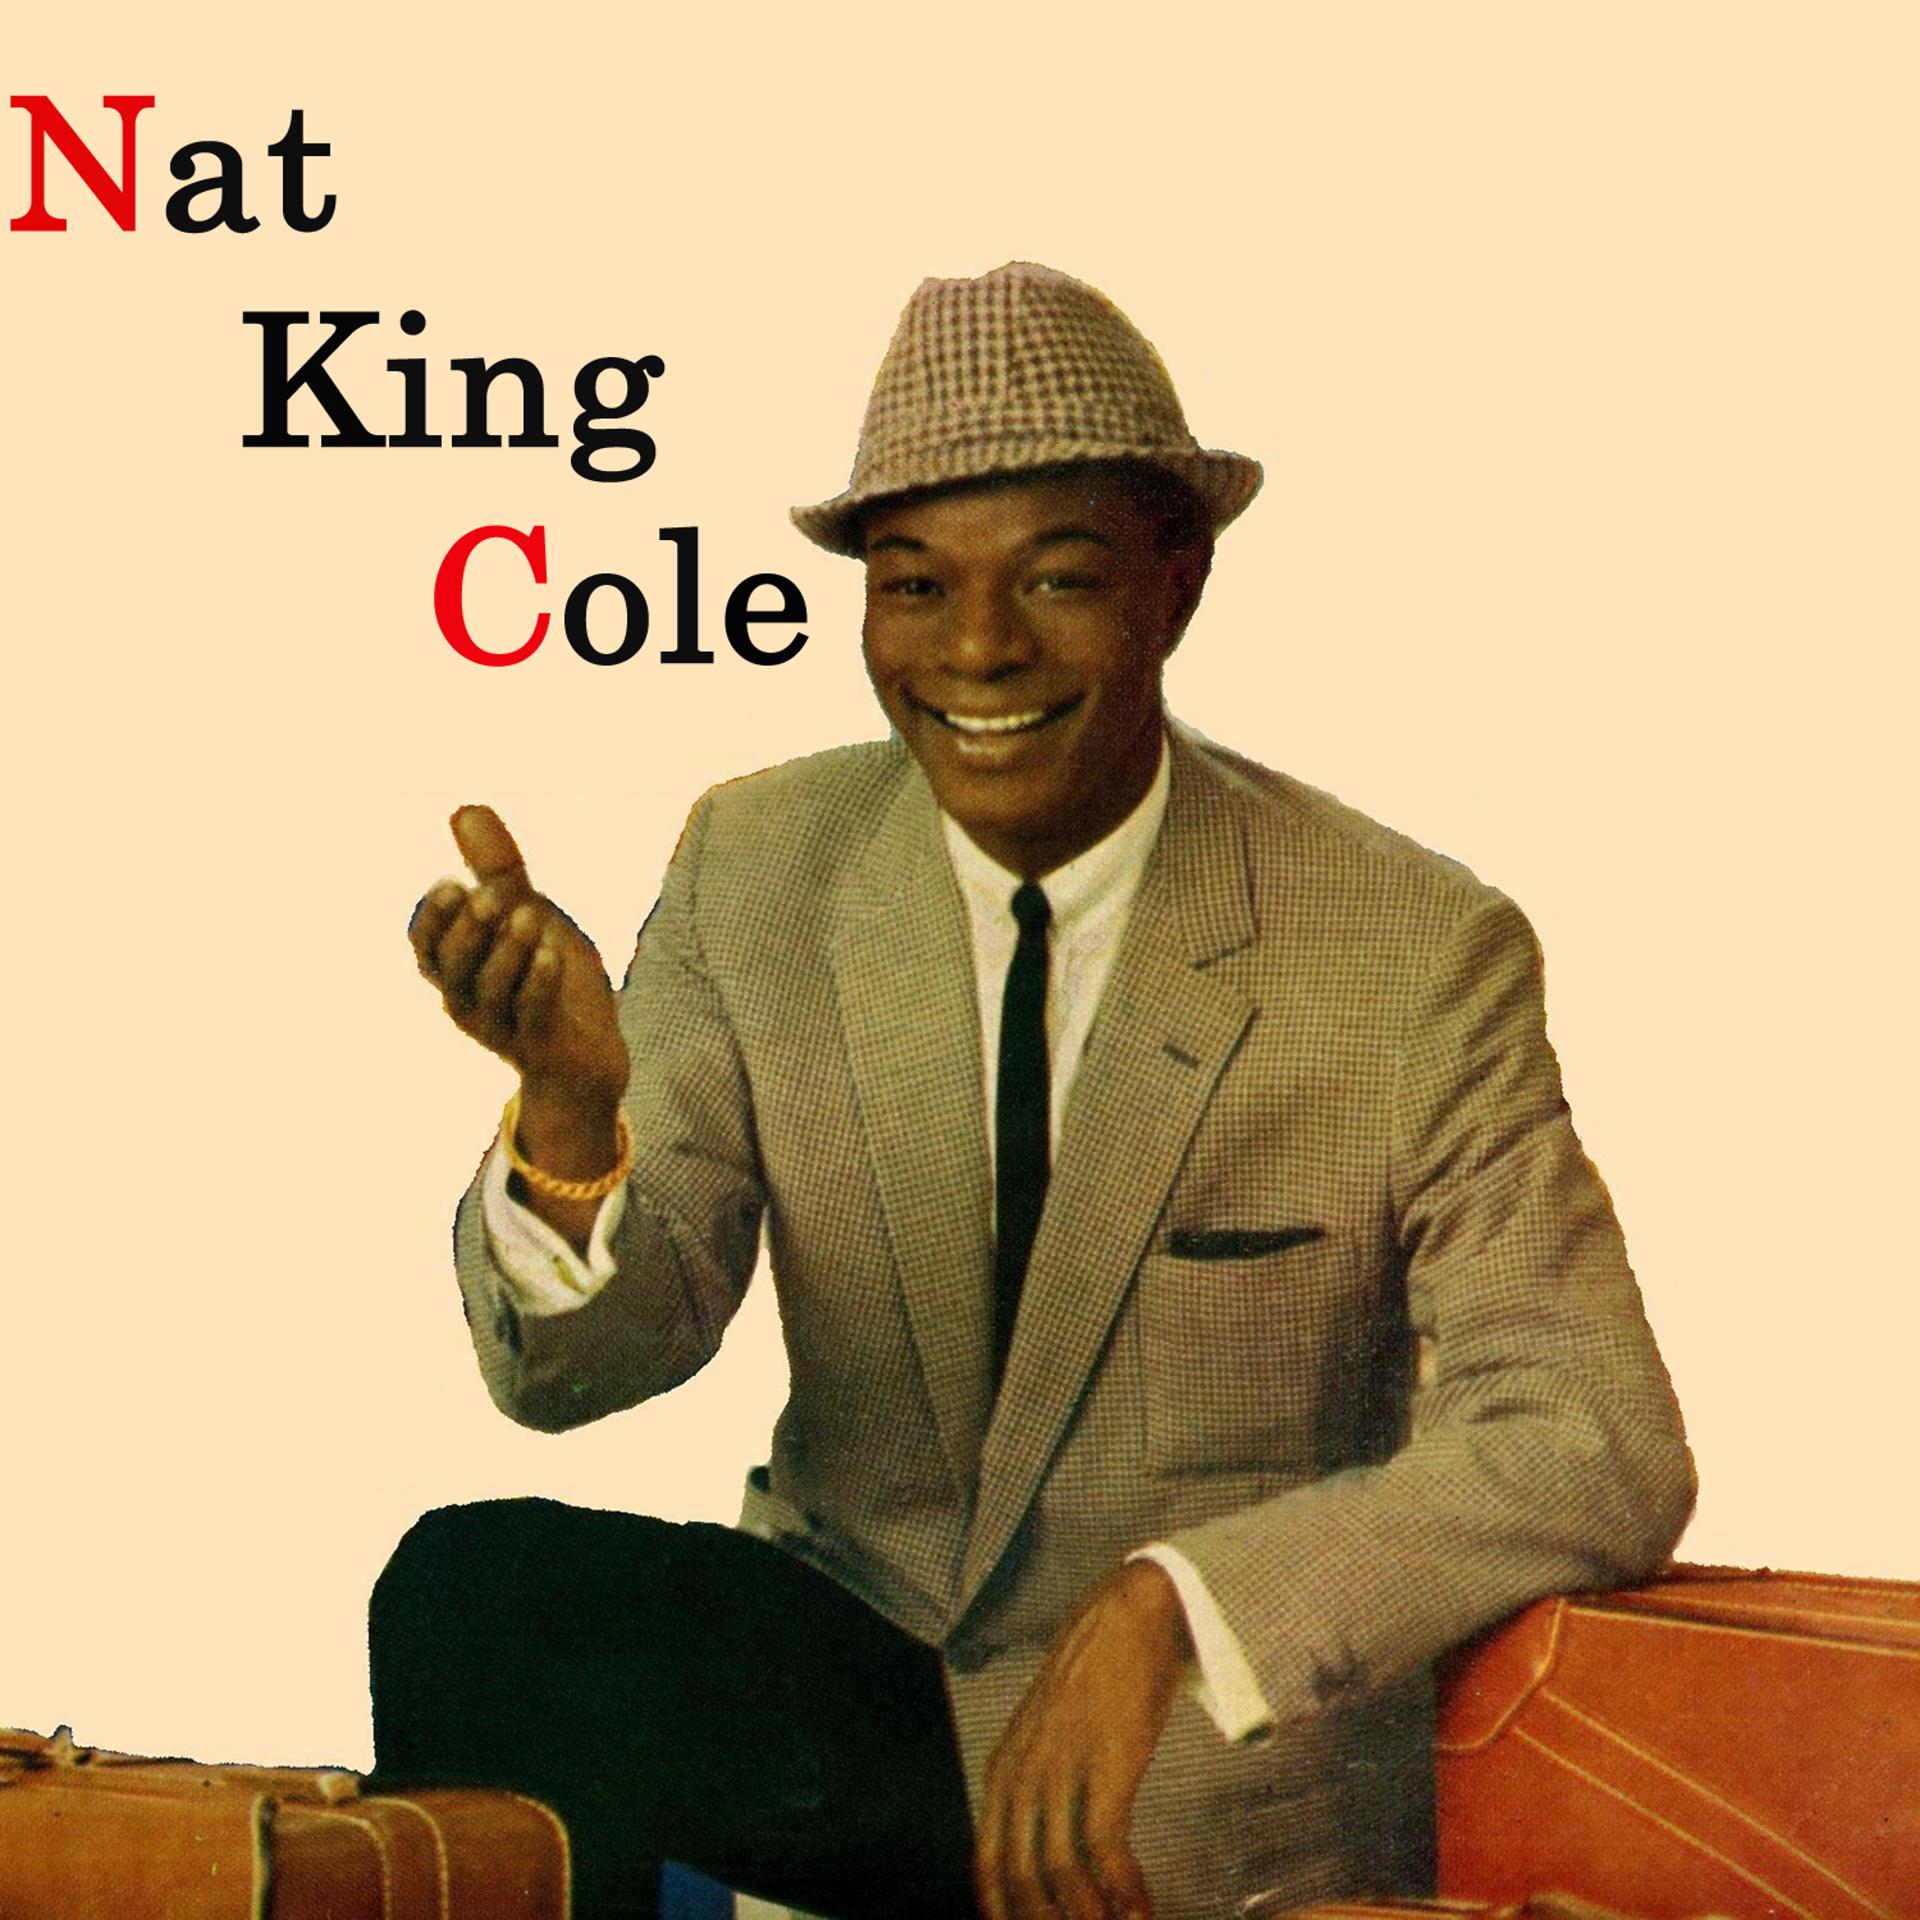 Постер альбома "Serie All Stars Music" Nº 035 Exclusive Remastered From Original Vinyl First Edition (Vintage Lps) "Nat King Cole Español"